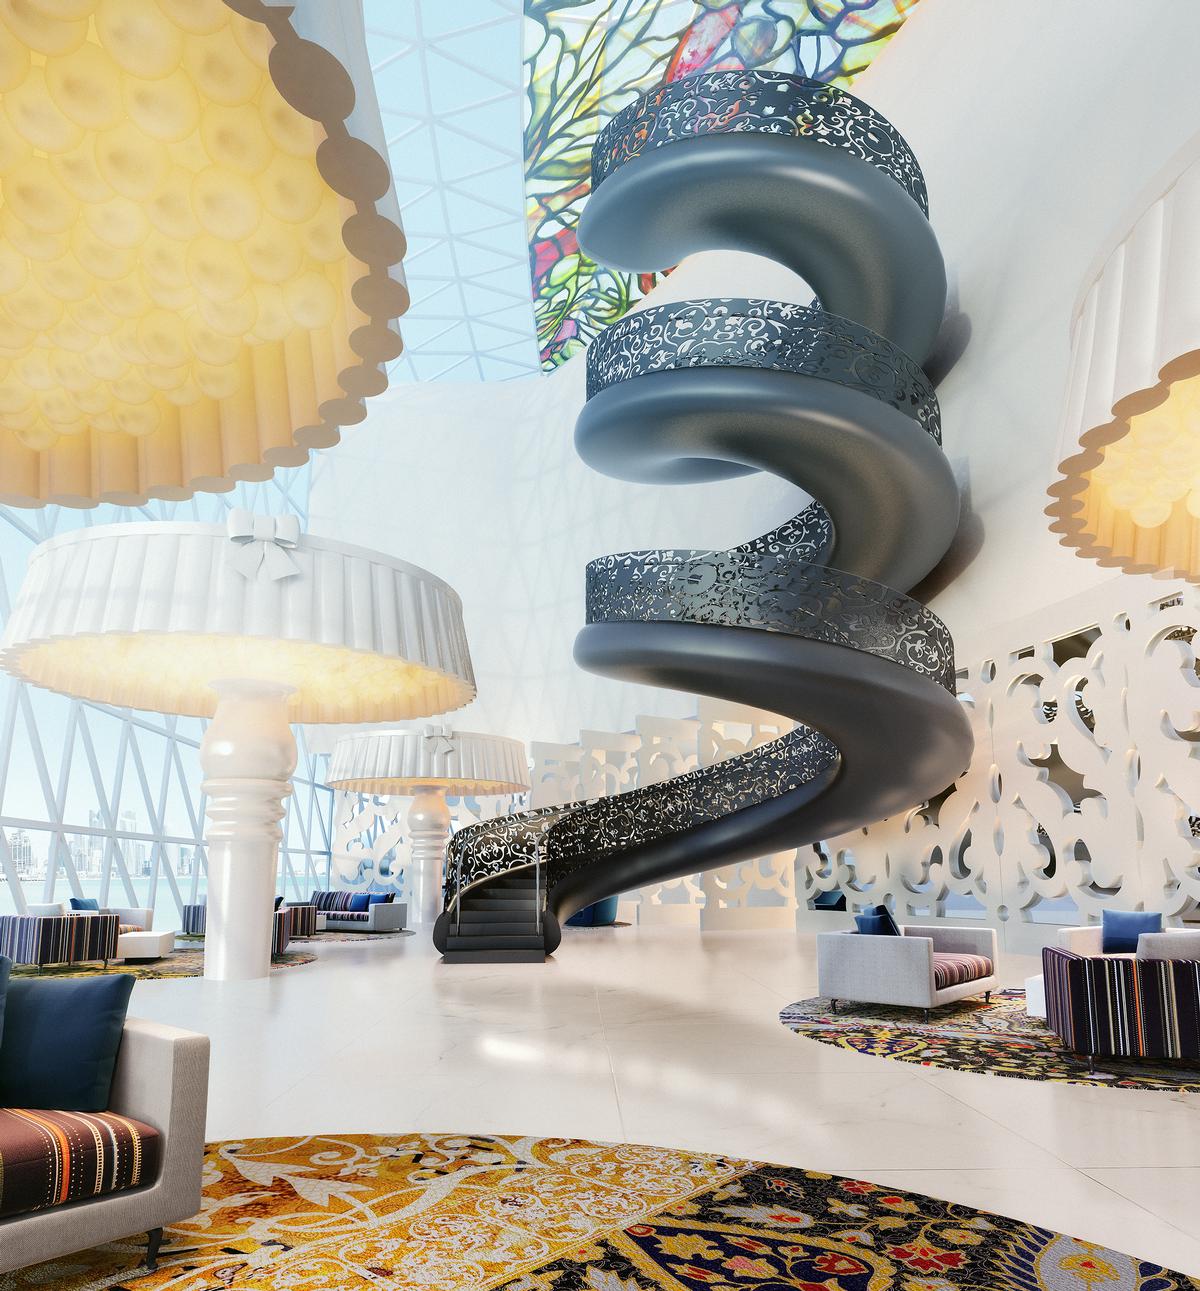 Interview with Marcel Wanders on the Next Big Thing in Hotel Interior Design